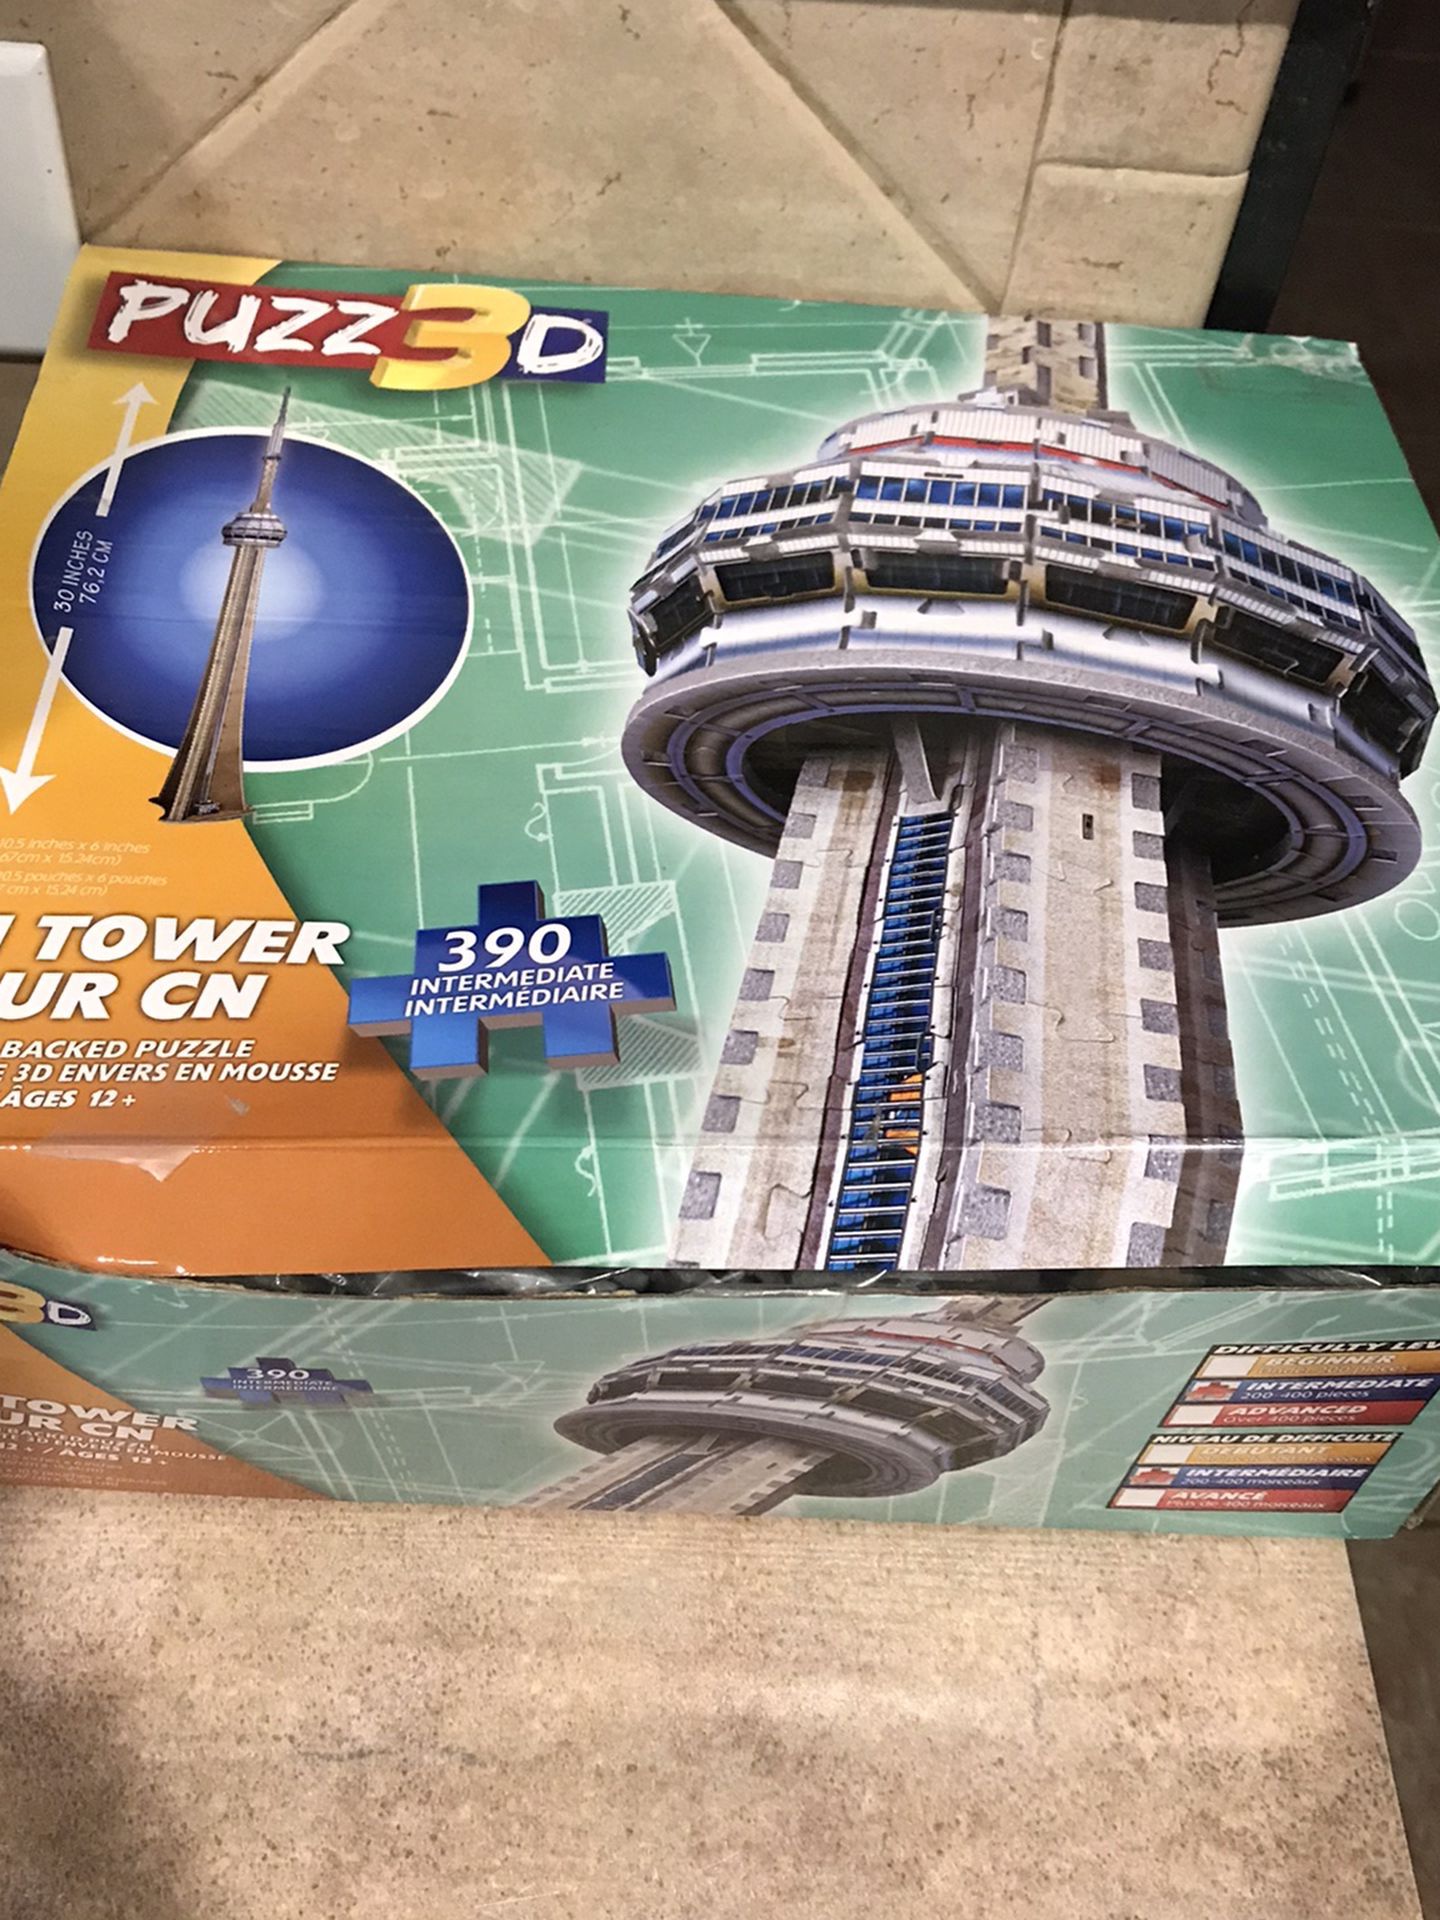 NEW Puzz 3D CN Tower Tour CN 390 PC Form Backed Puzzle